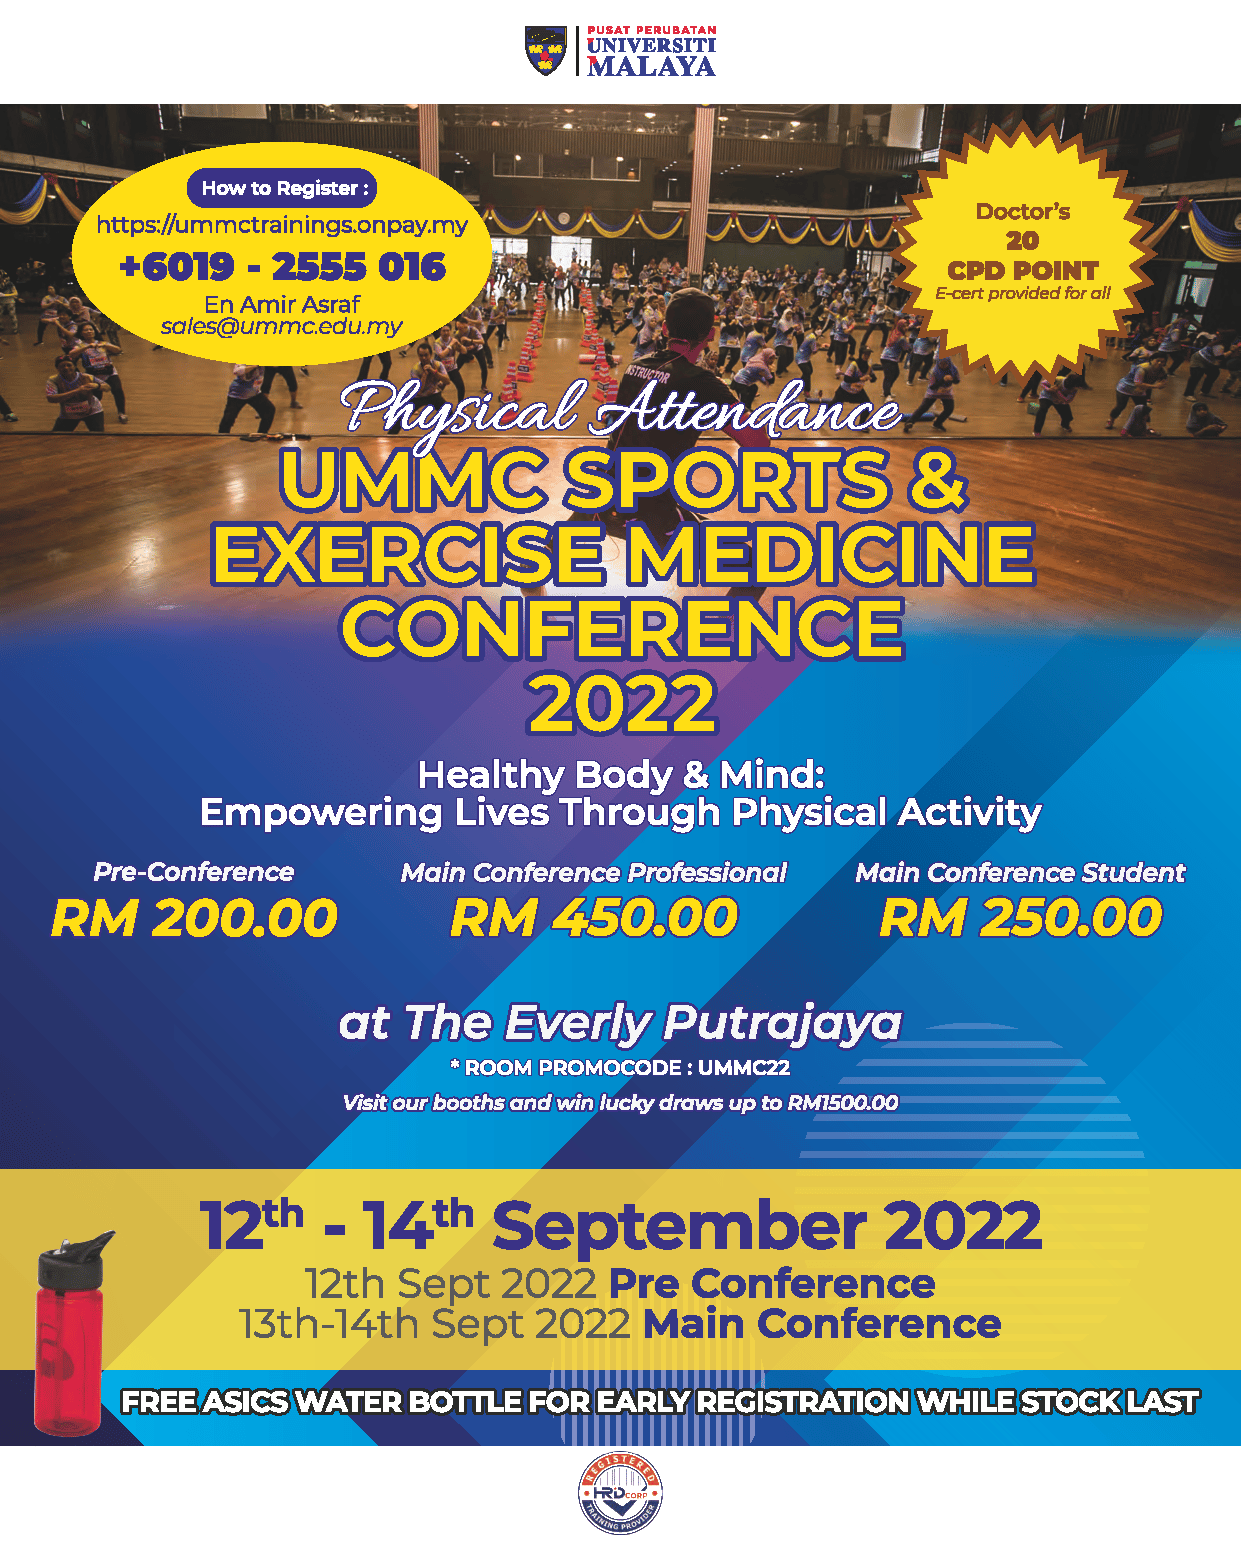 UMMC SPORTS & EXERCISE MEDICINE CONFERENCE Conference2Go Find The